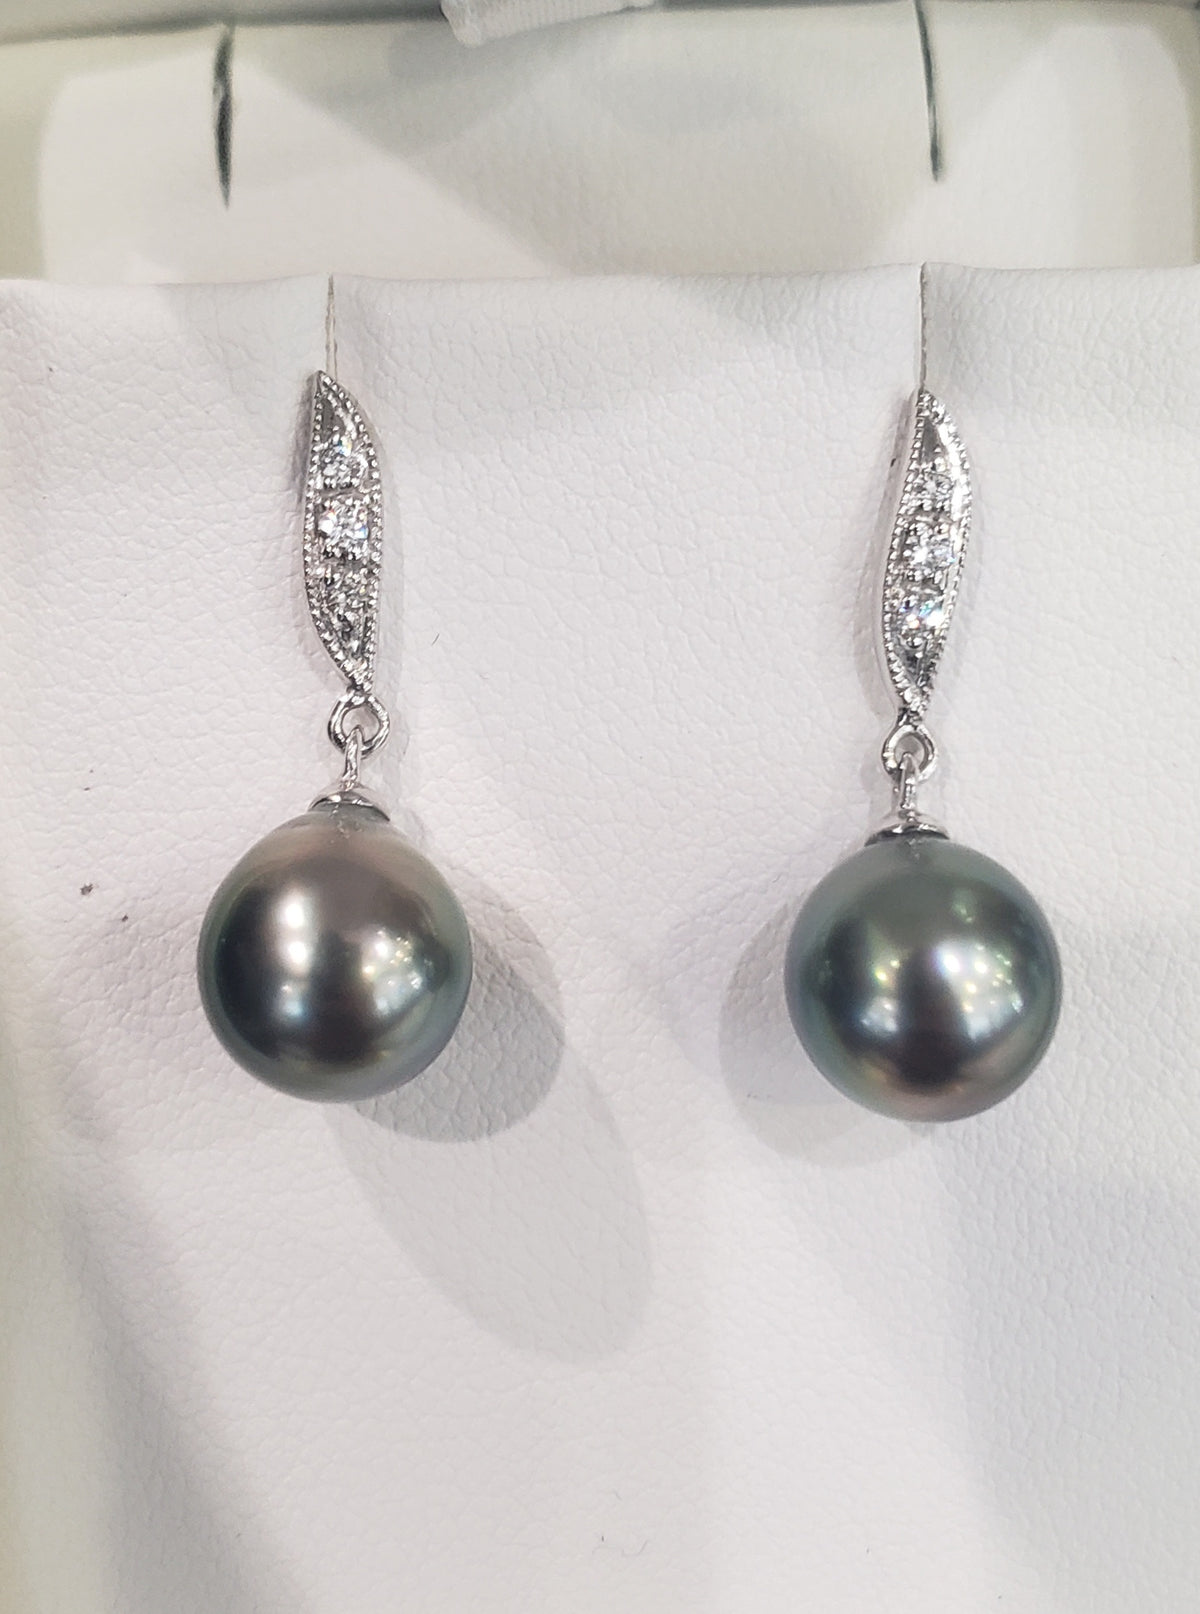 14K White Gold 9-9.5mm Tahitian Pearl and 0.06cttw Diamond Earrings with Butterfly Backs